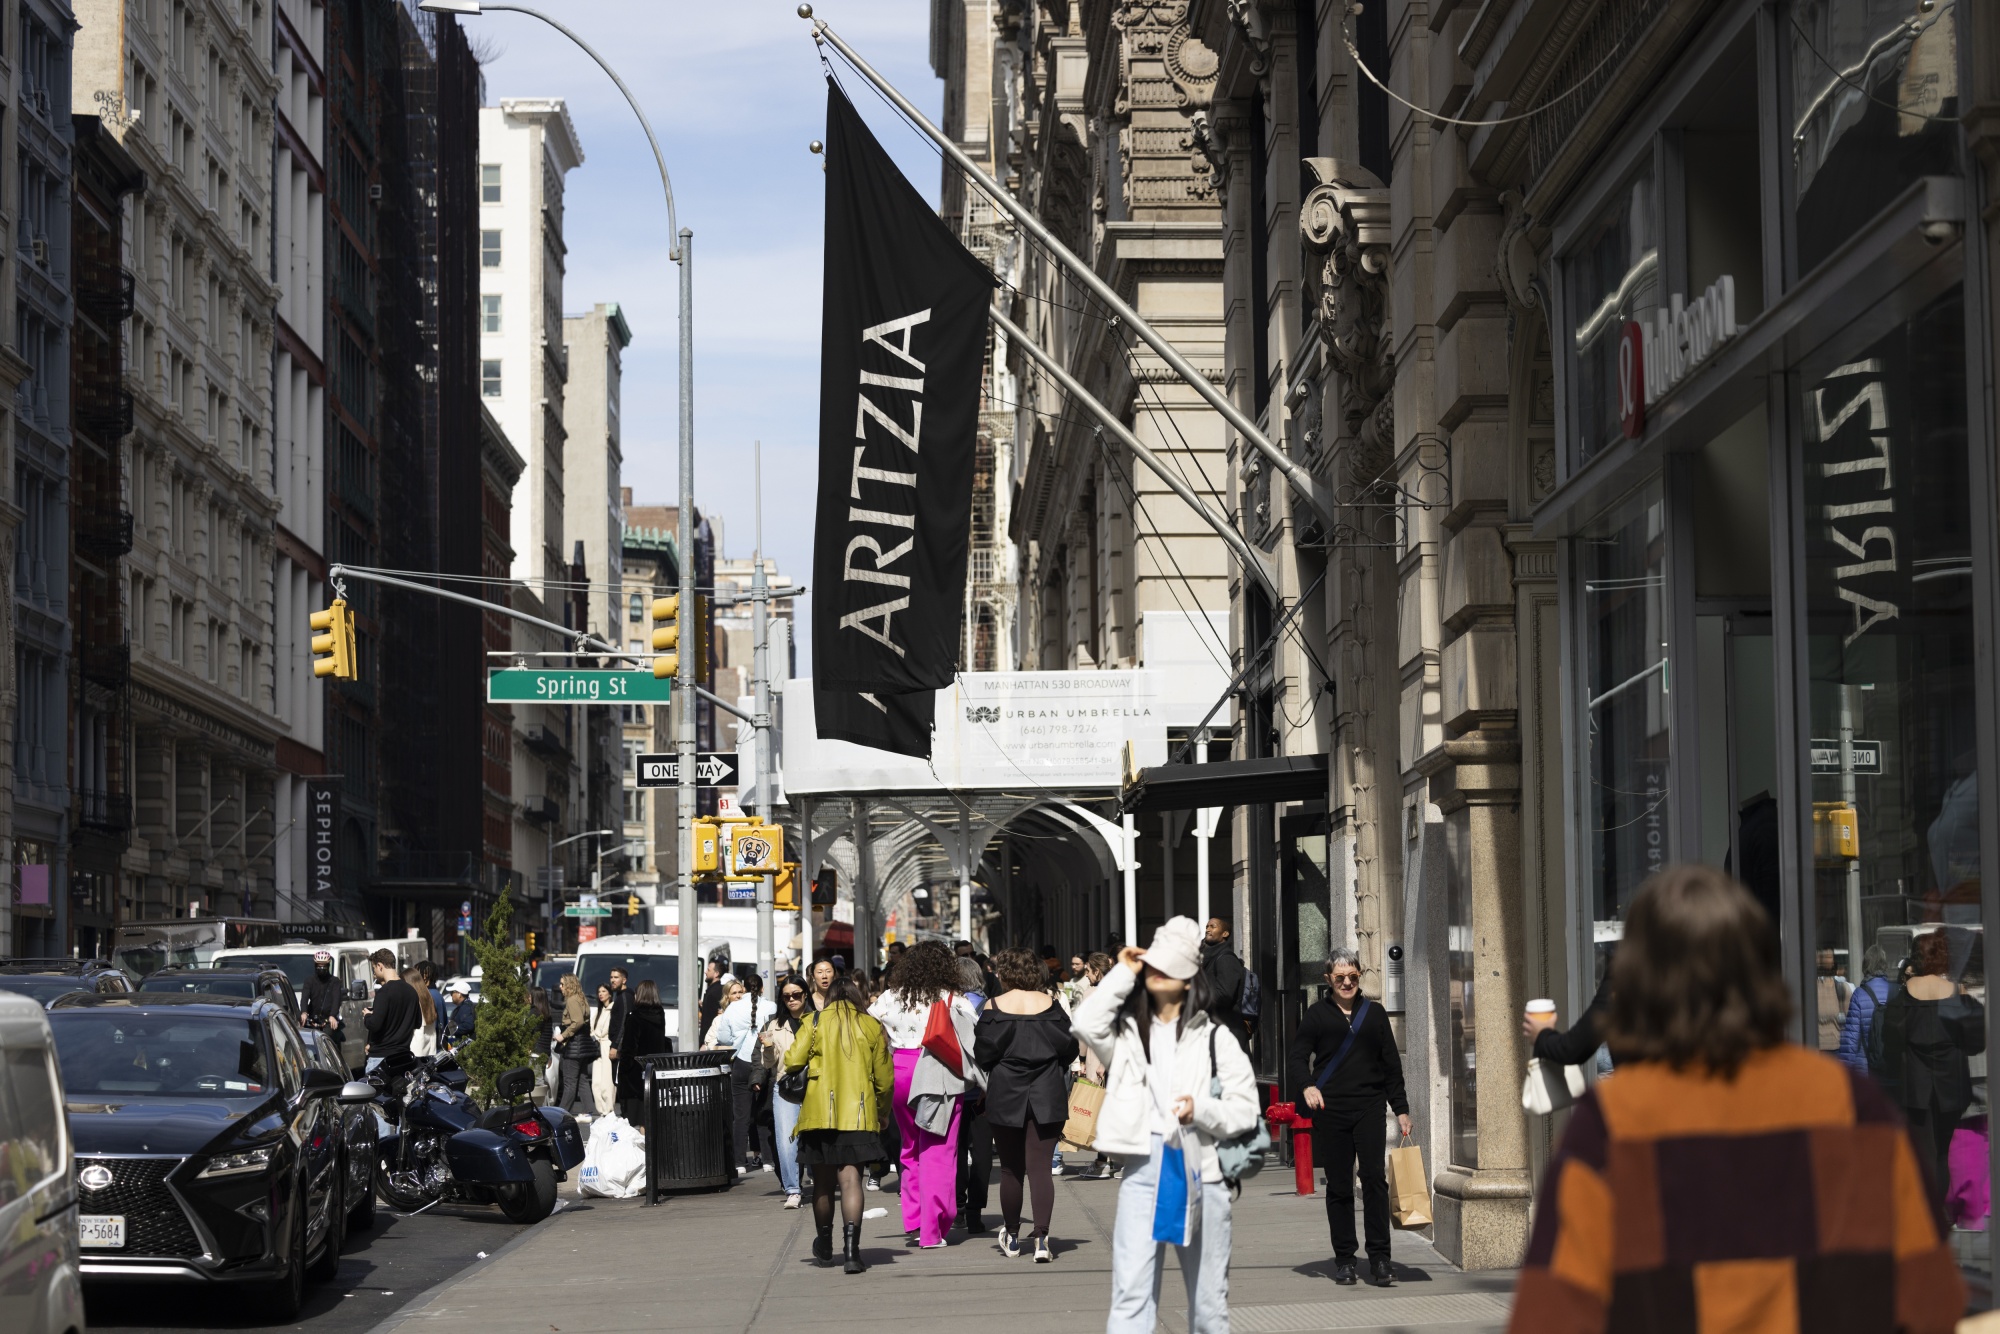 Retailer Aritzia files for IPO on TSX amid record slow year for